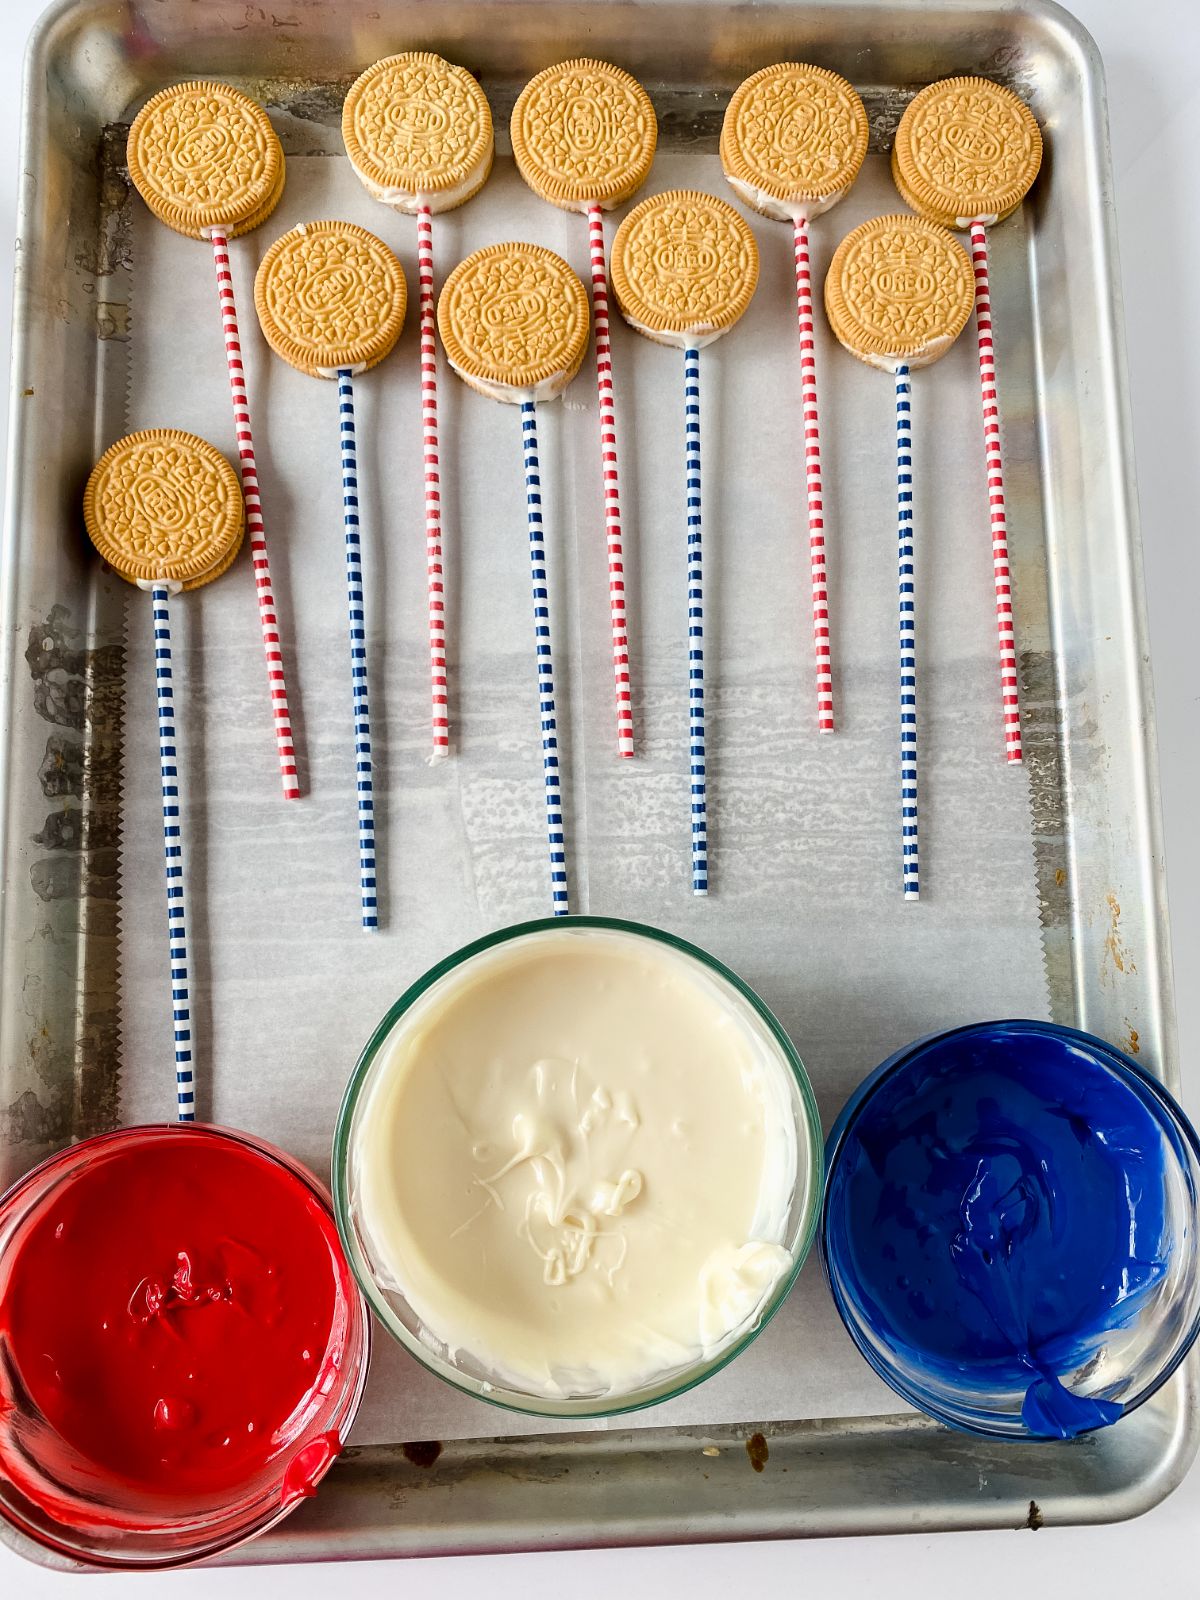 tray of cookies on striped straws by bowls of patriotic chocolate melted